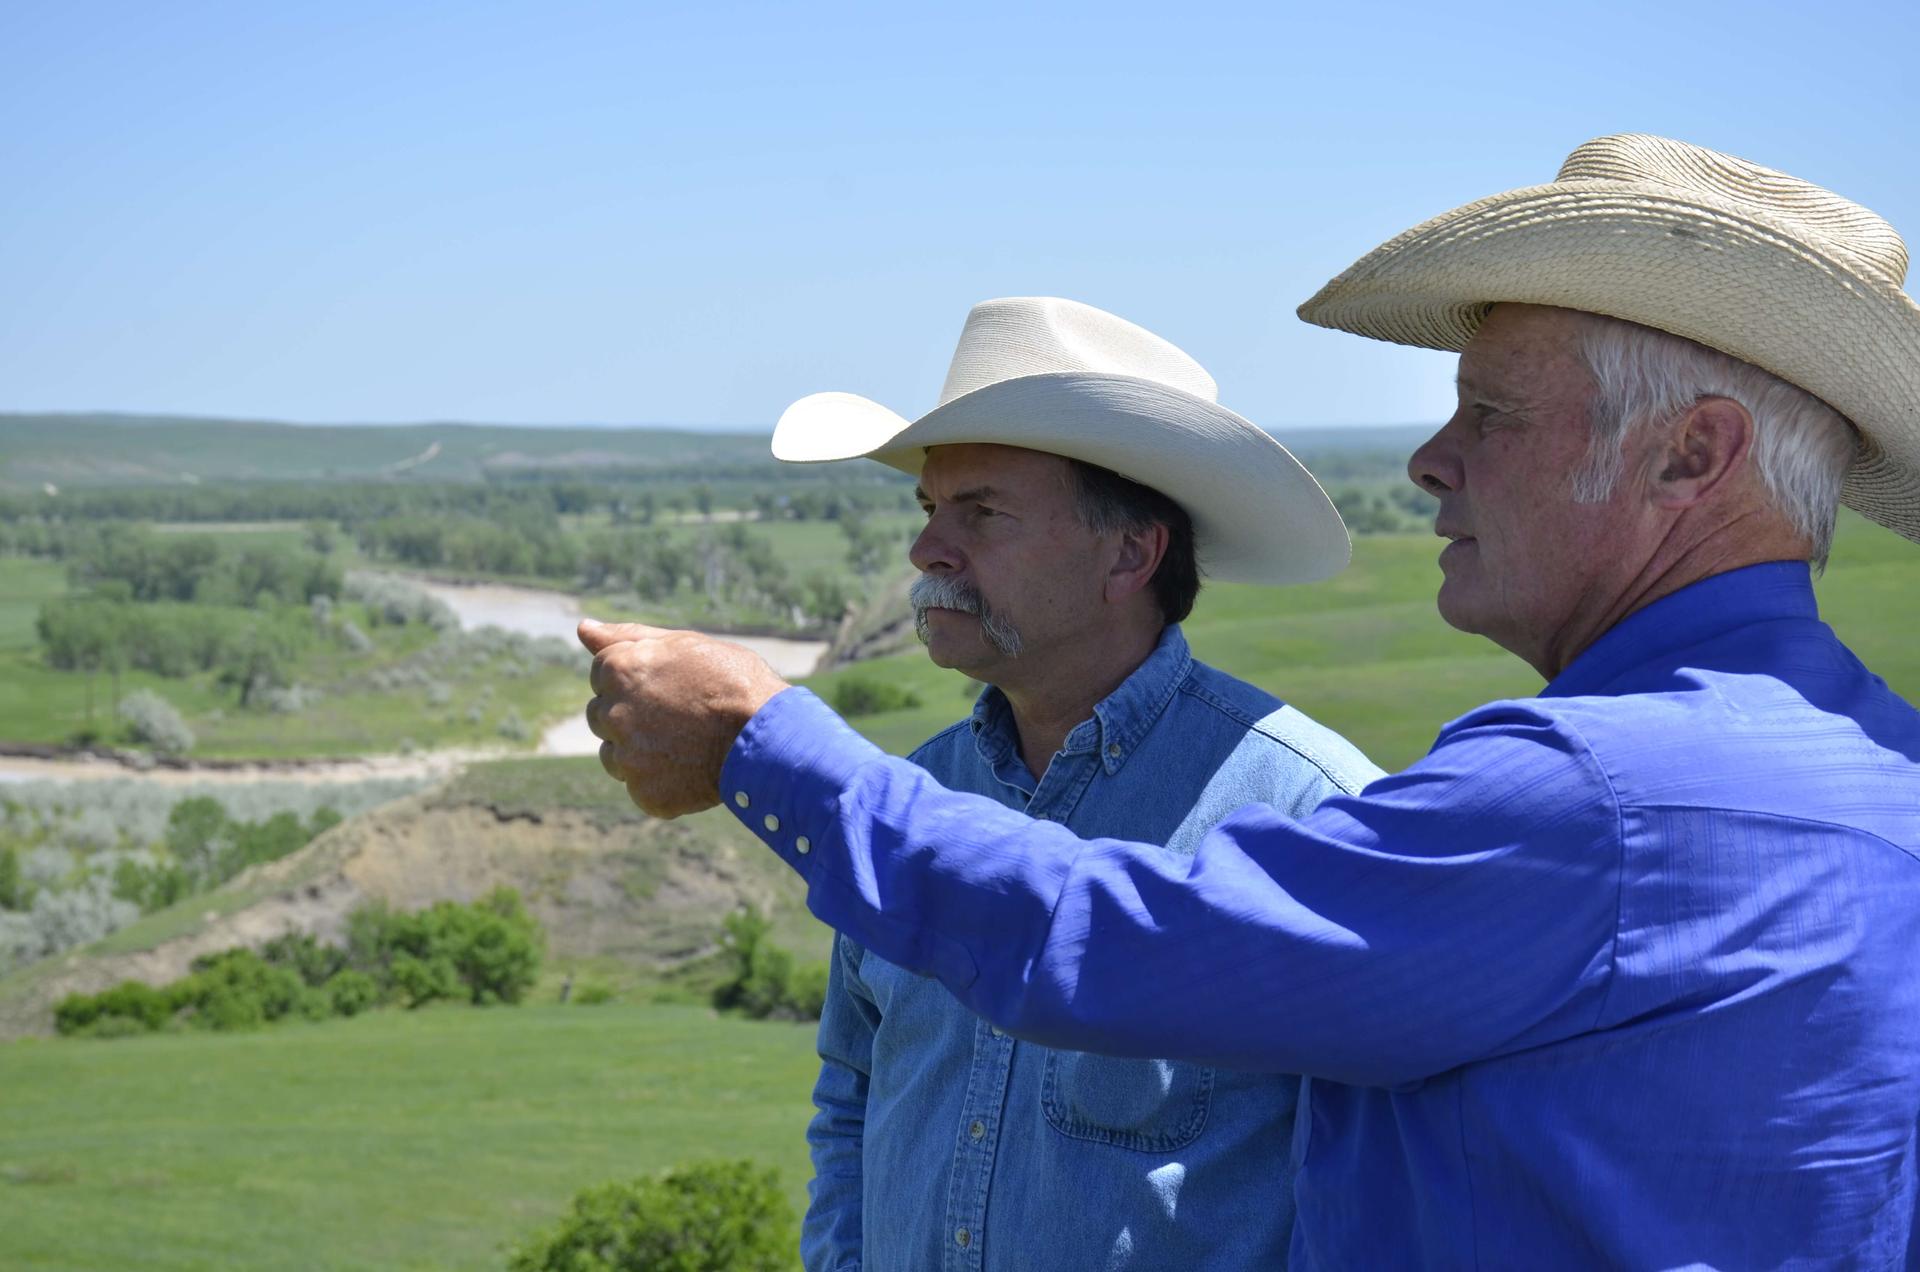 two men wearing cowboy hats stand on a ranch and point